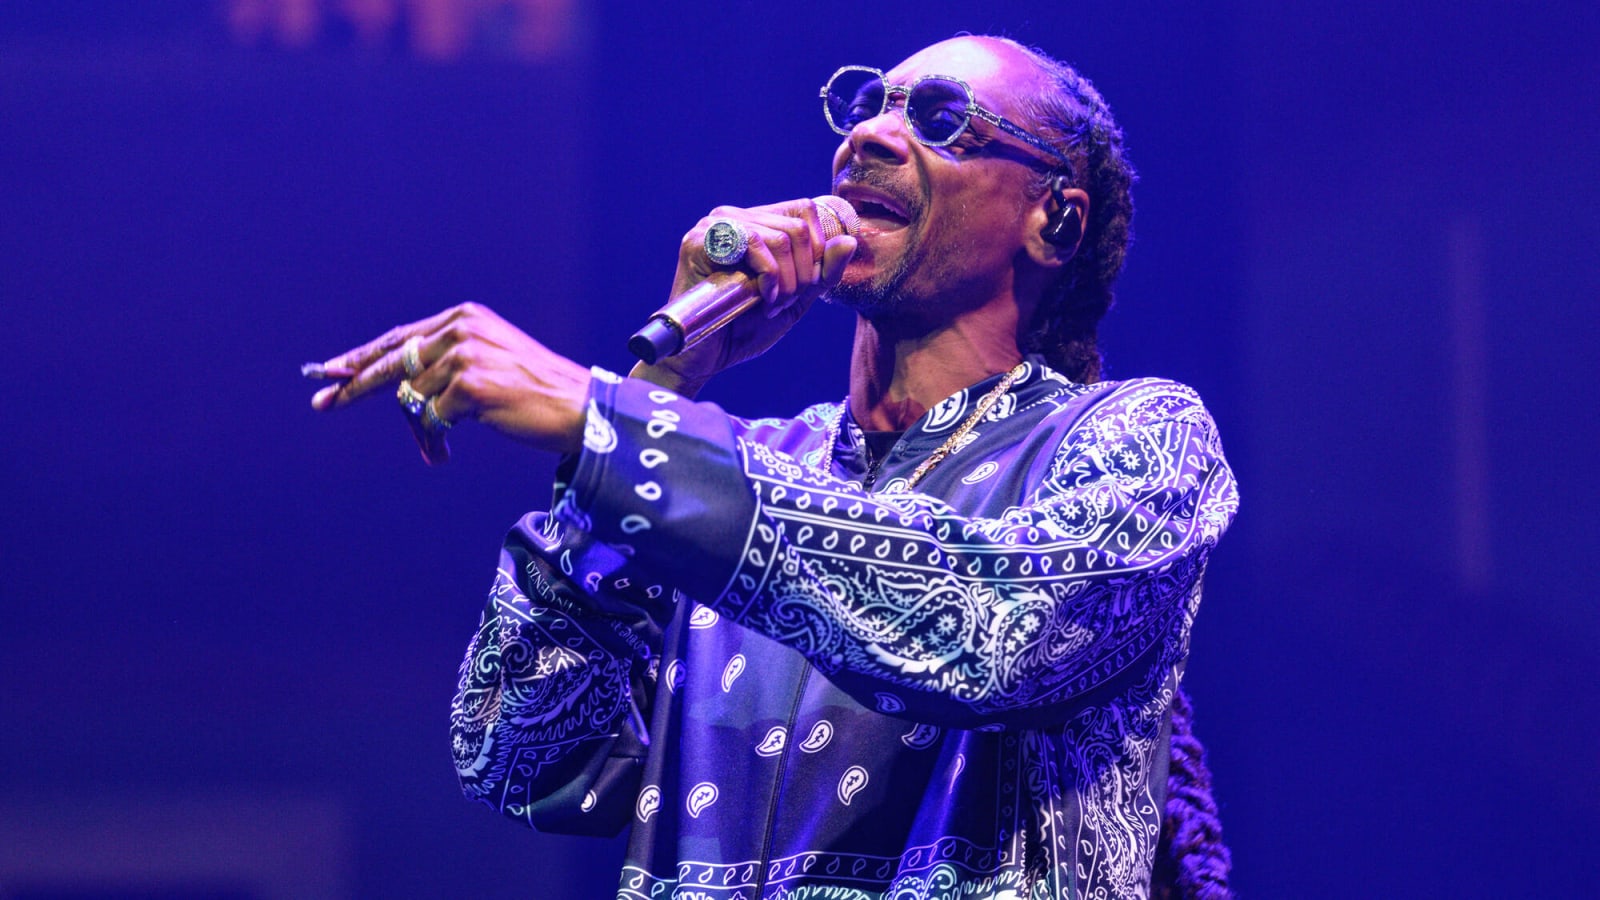 Snoop Dogg joins NBC’s 2024 Paris Olympics coverage as special correspondent bringing fresh perspective to primetime